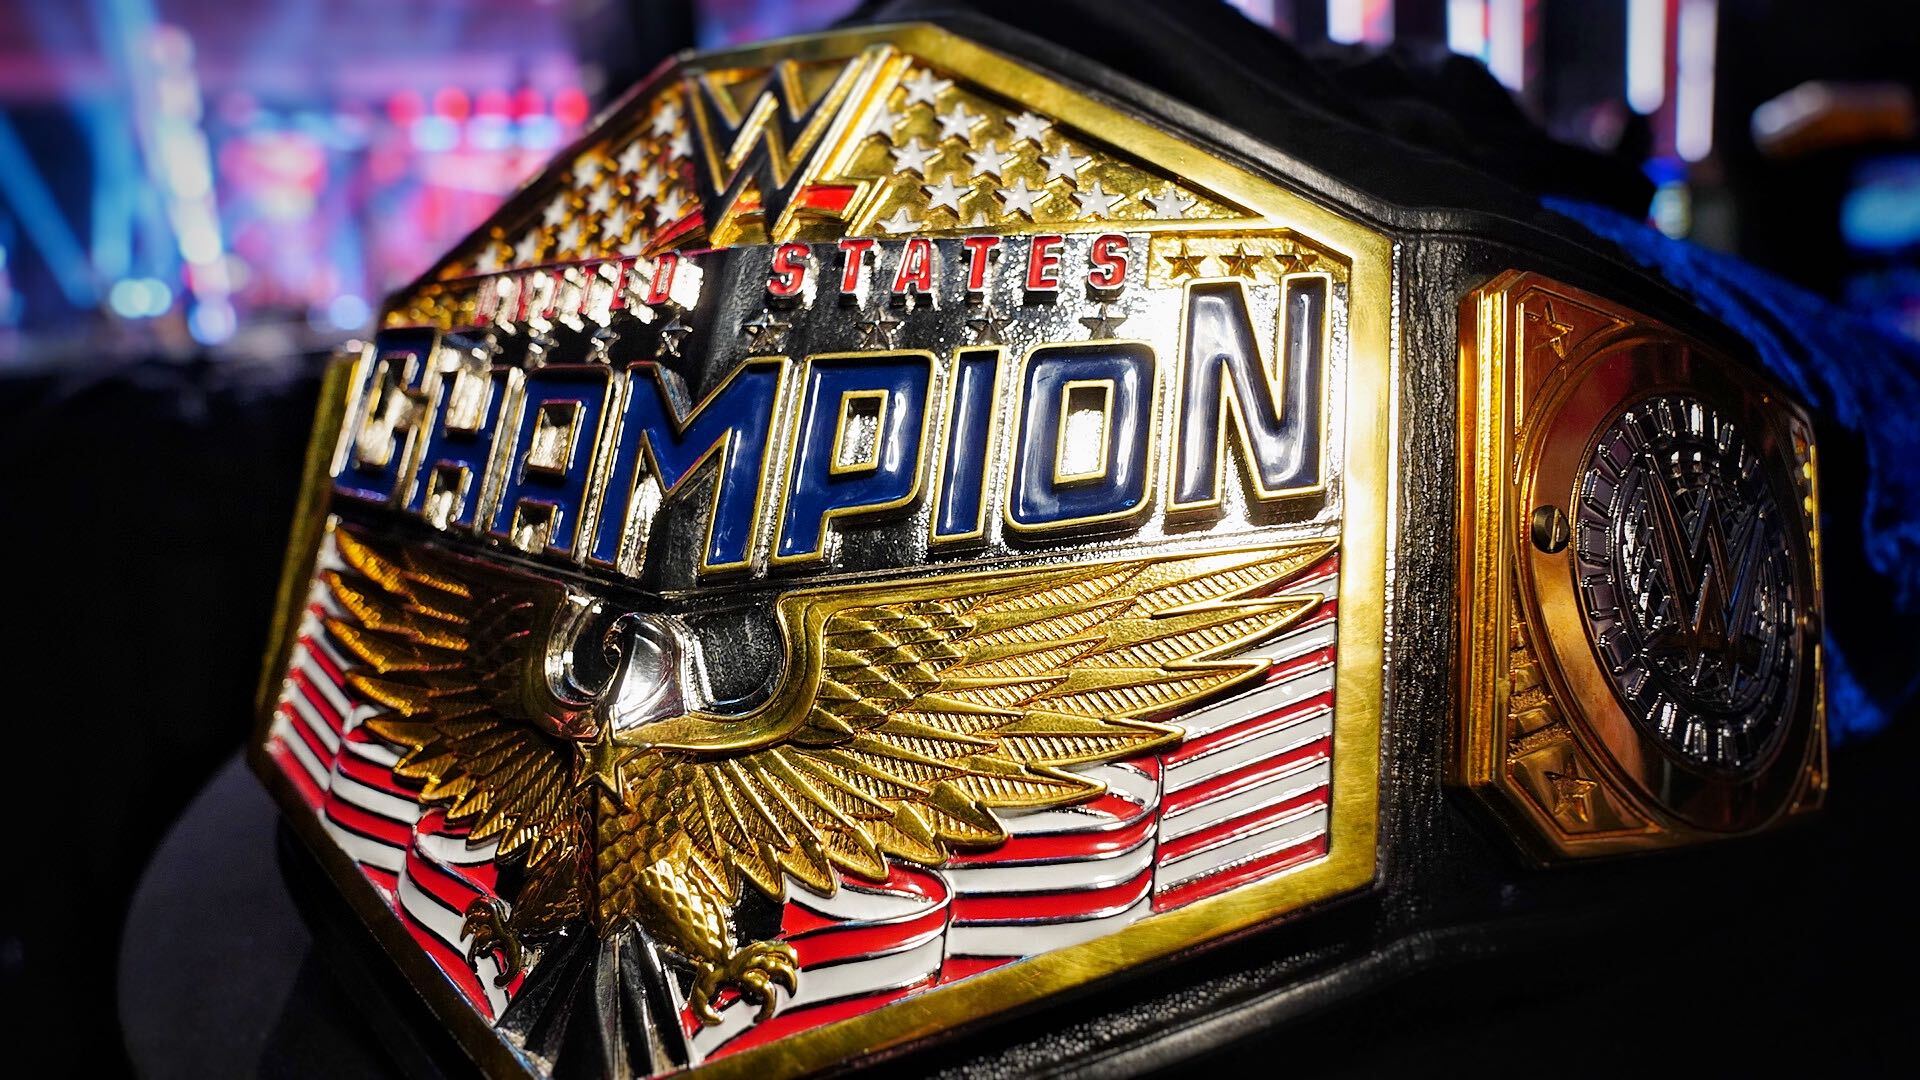 More On Wwe S New U S Title Belt Design And More New Wwe Belts Planned